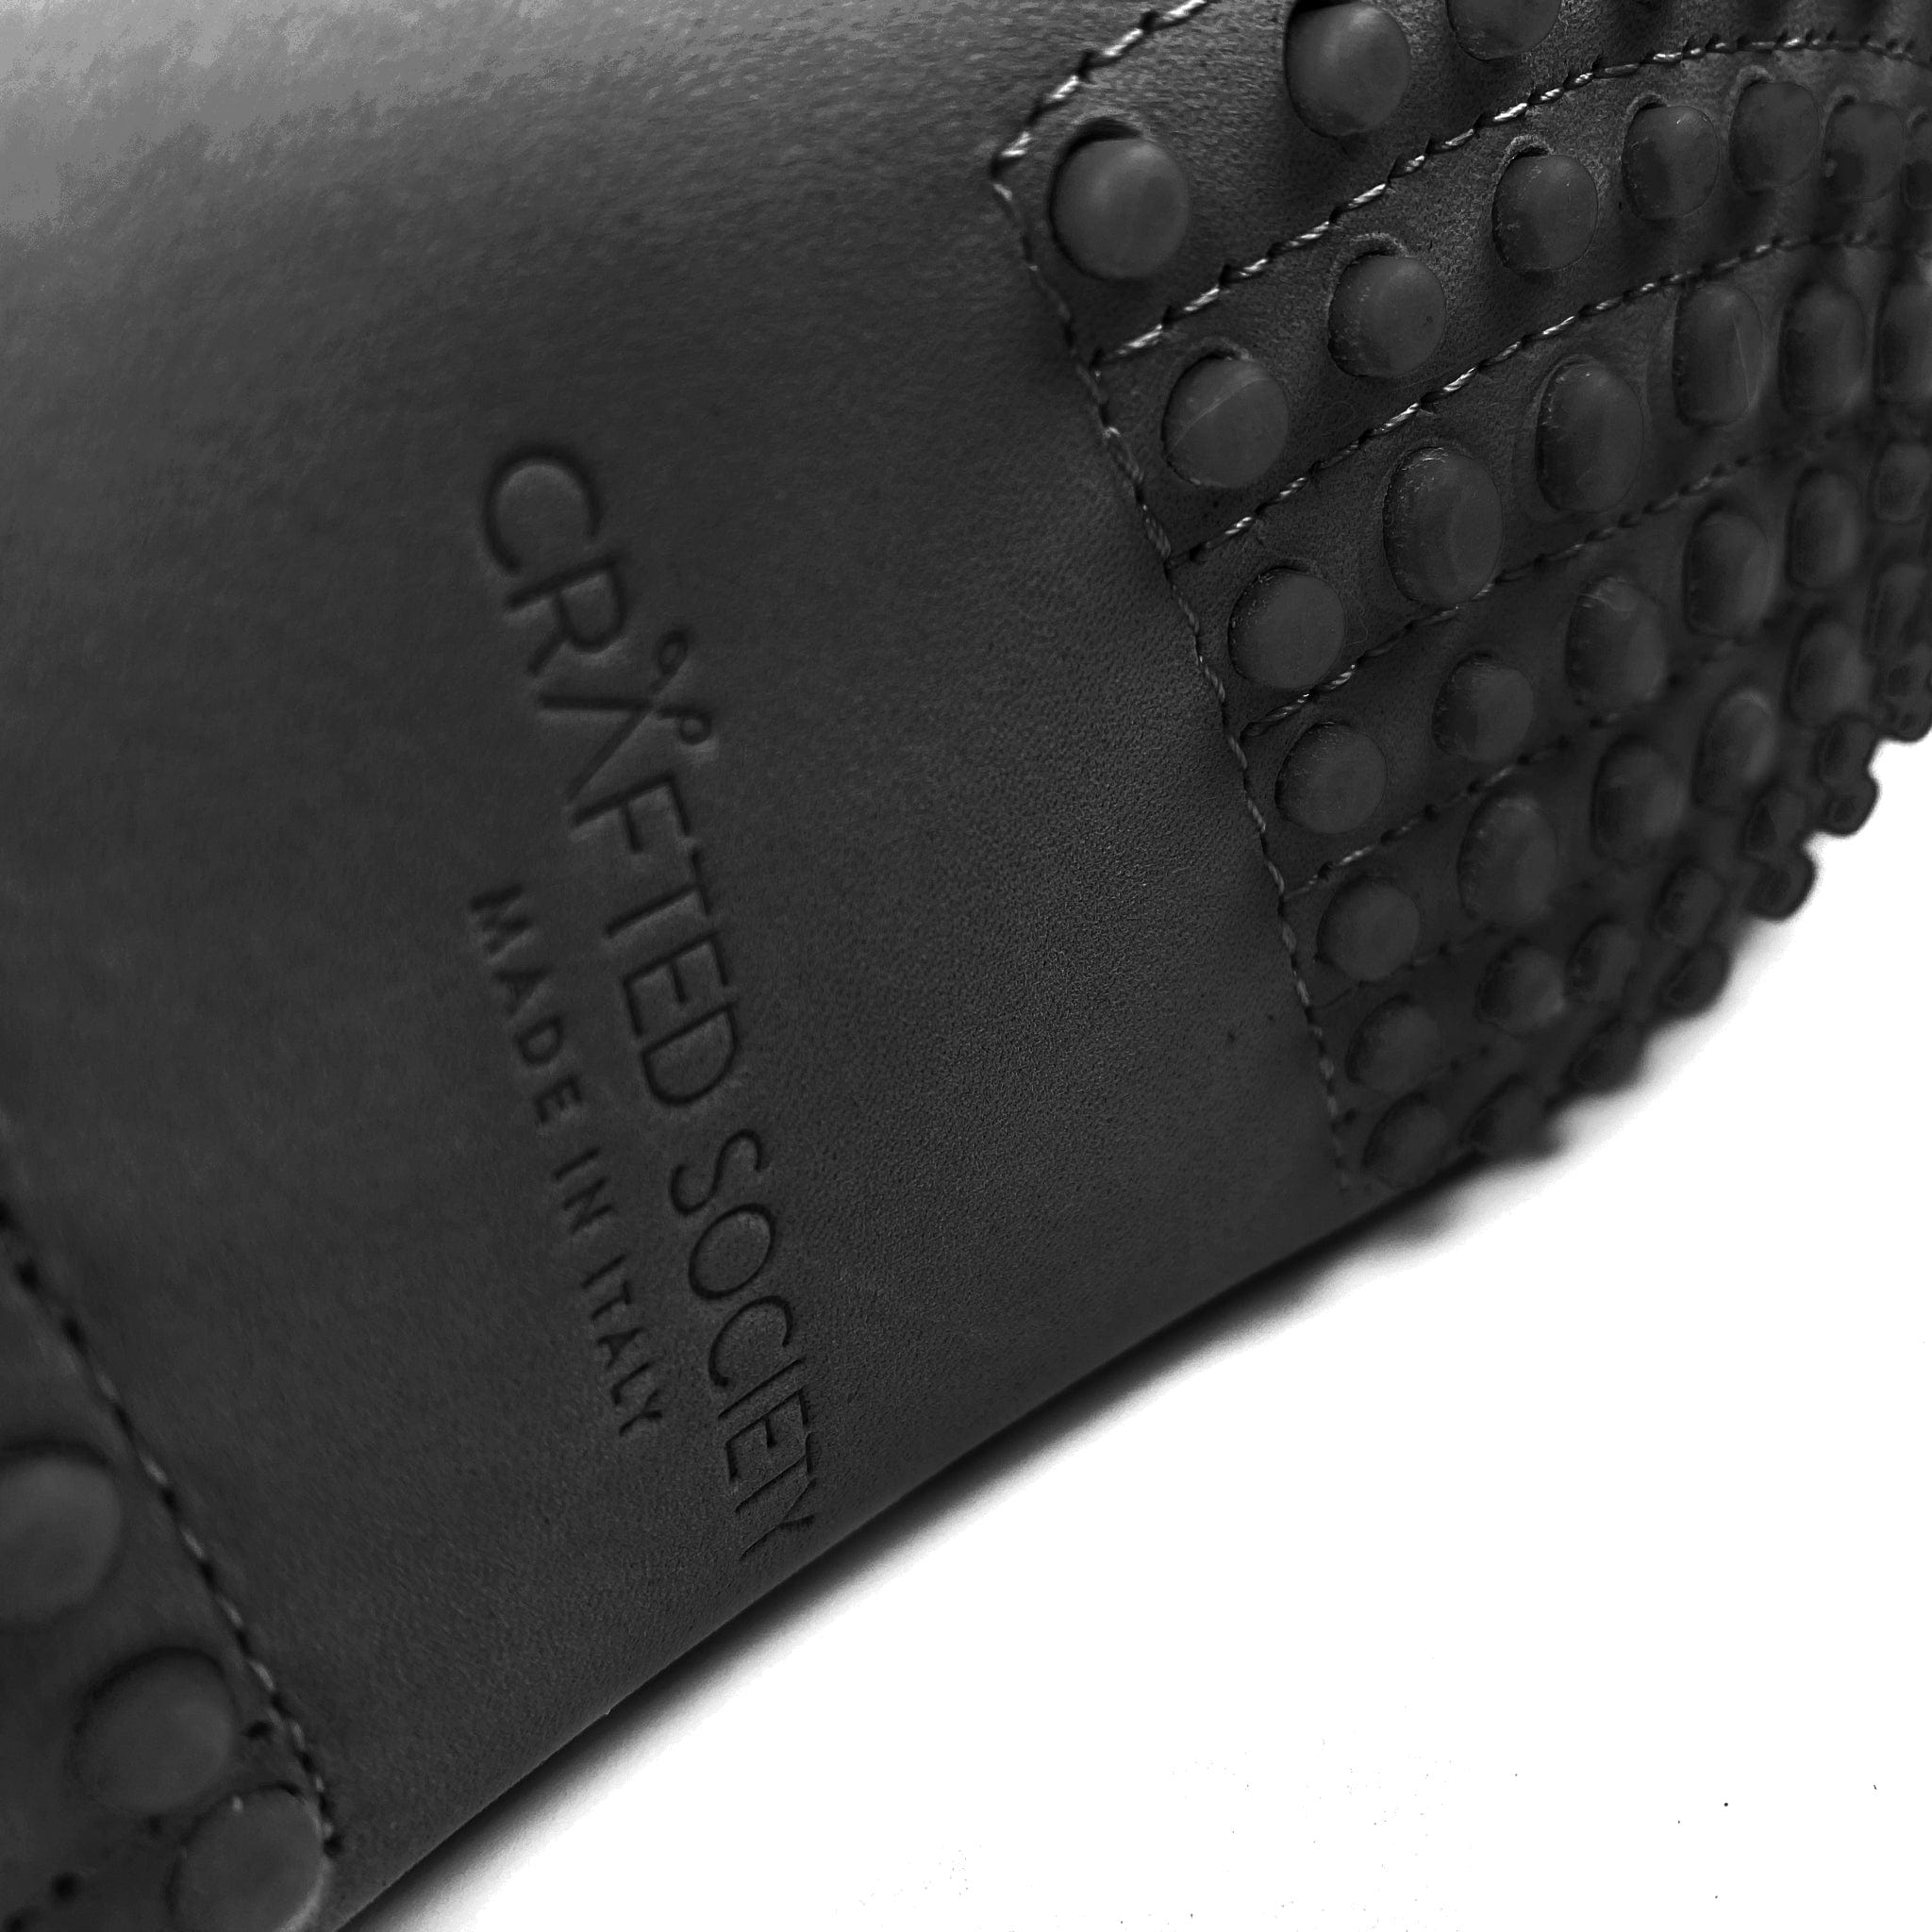 Driving shoe or moccasin in black italian nubuck. close-up detail of bottom of shoe with iconic rubber pebble outsole and crafted society logo made in italy embossed in the leather